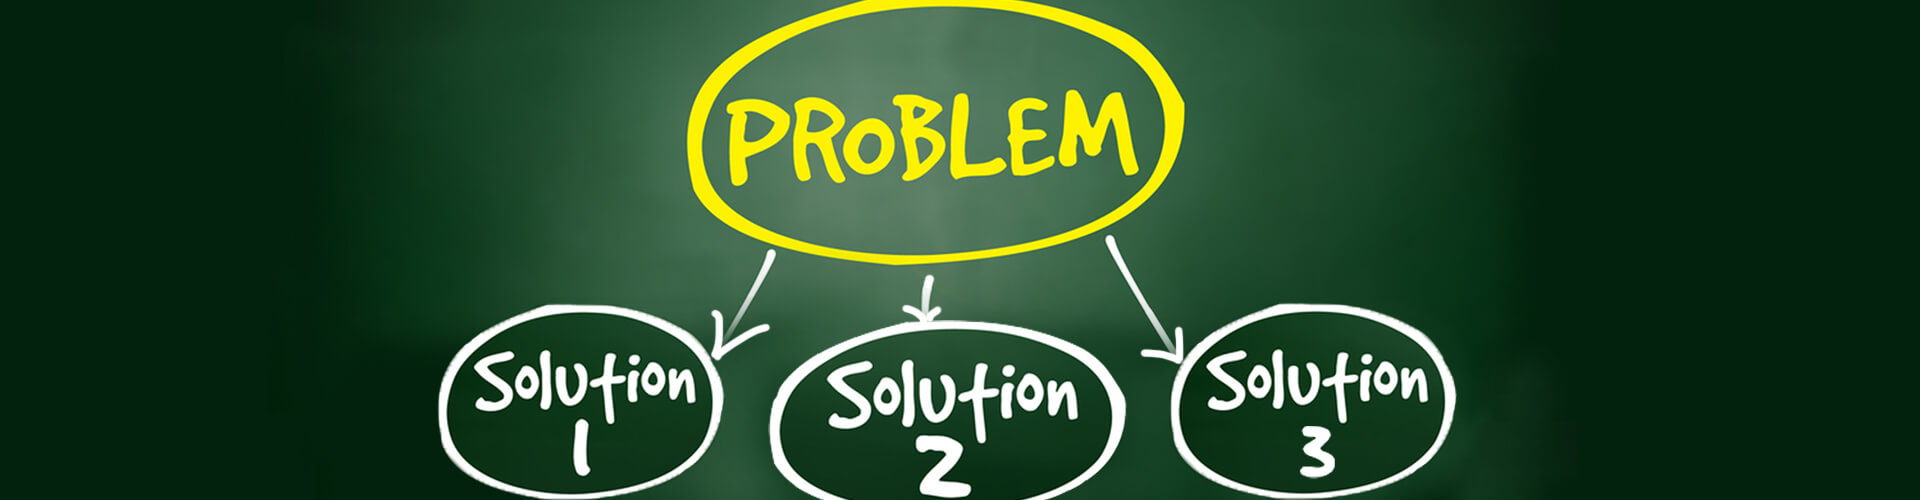 3 steps of the problem solving process